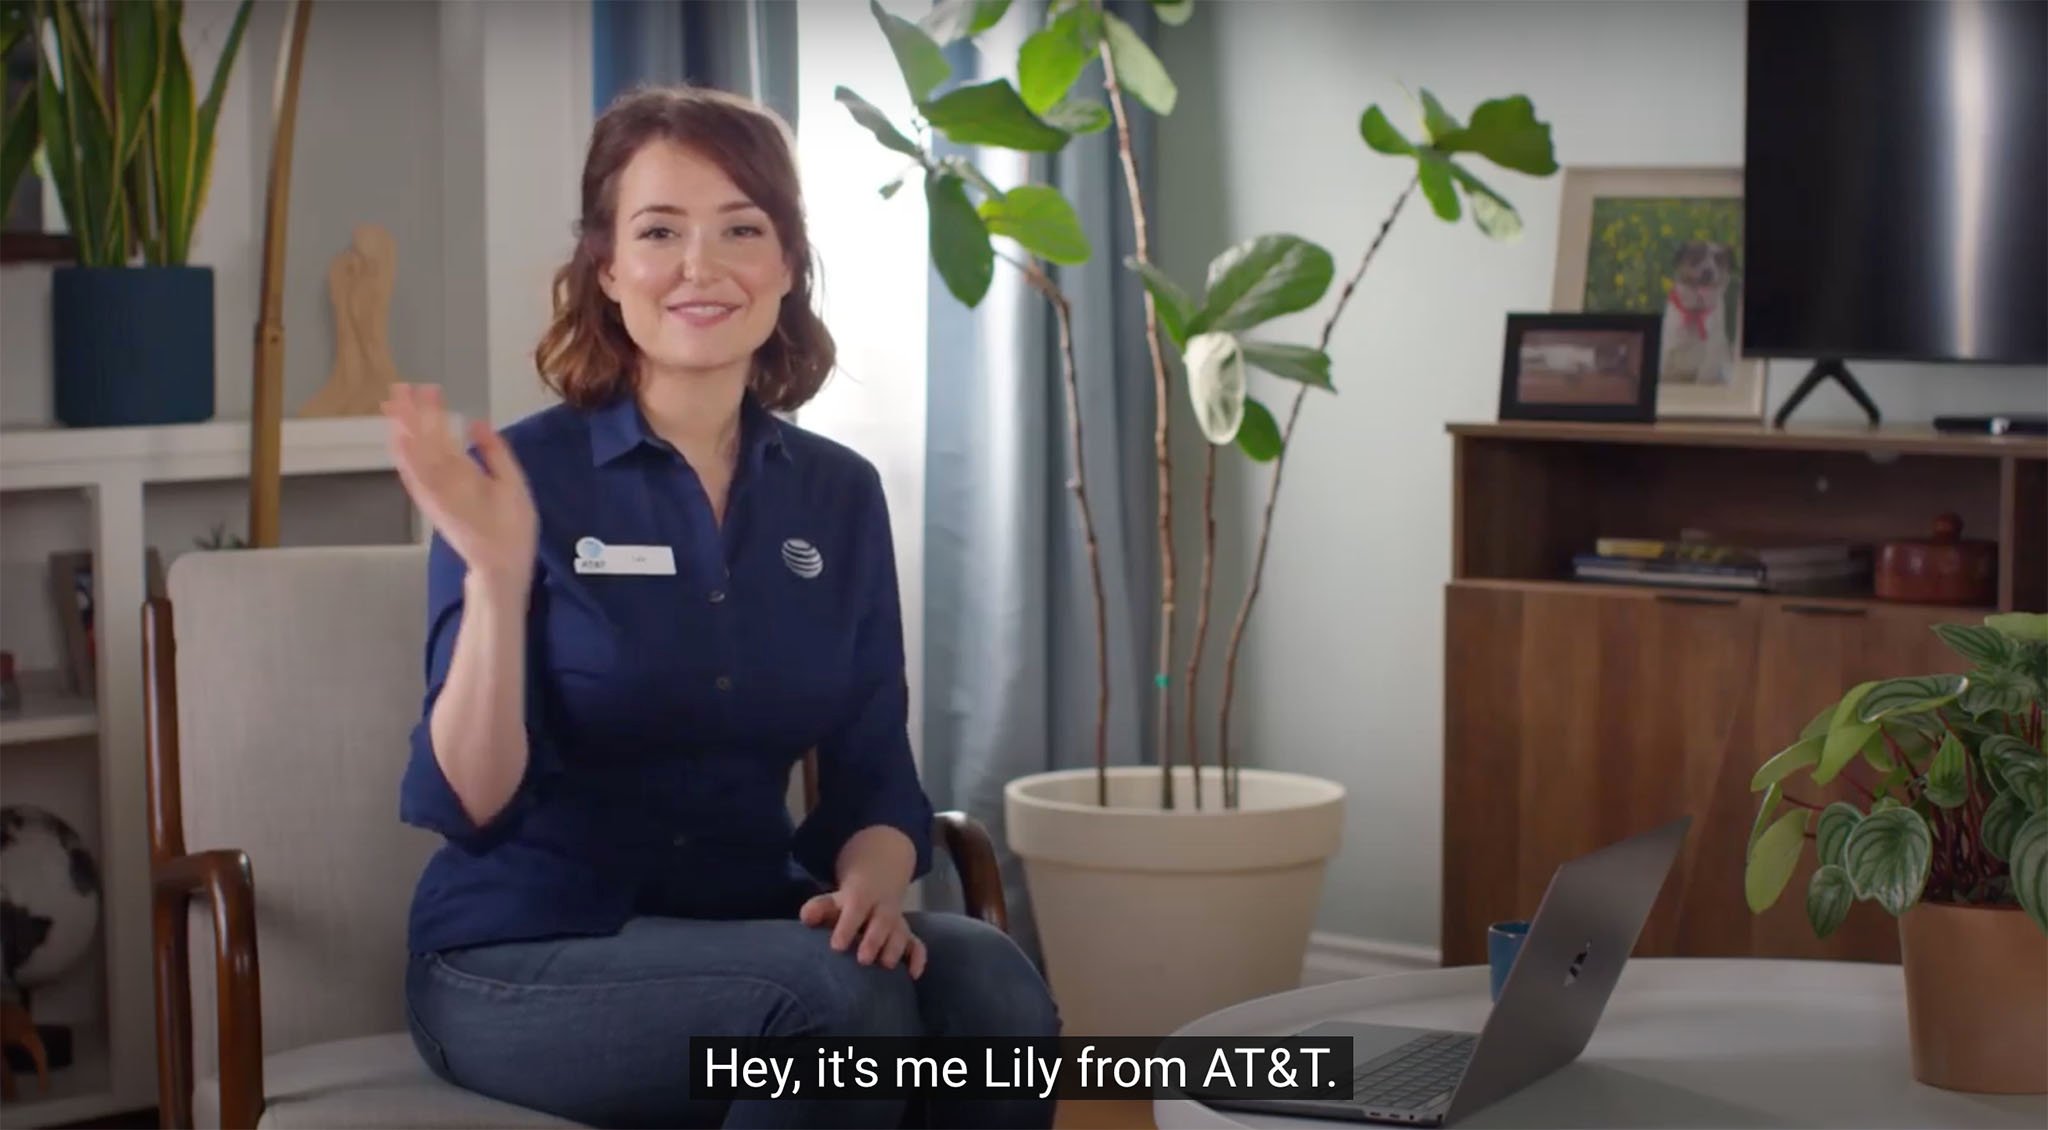 Milana Vayntrub endured severe harassment just for doing her job and starring as Lily James in AT&T commercials